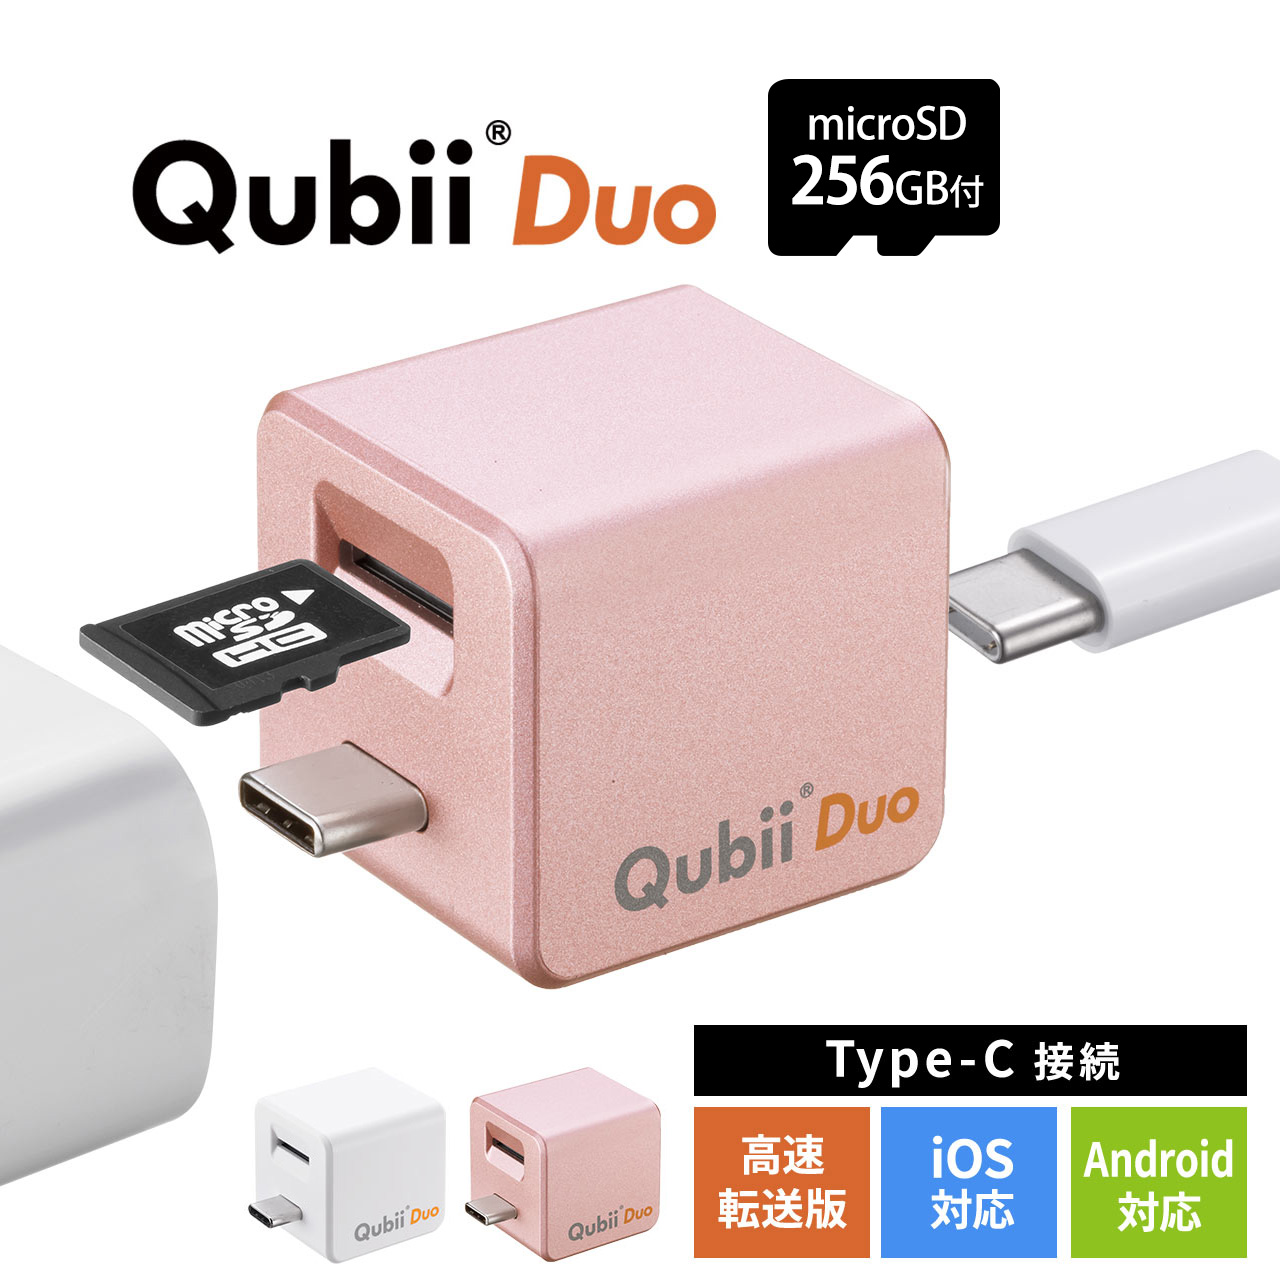 iPhone バックアップ 自動 Qubii Duo Type-C Android カードリーダー